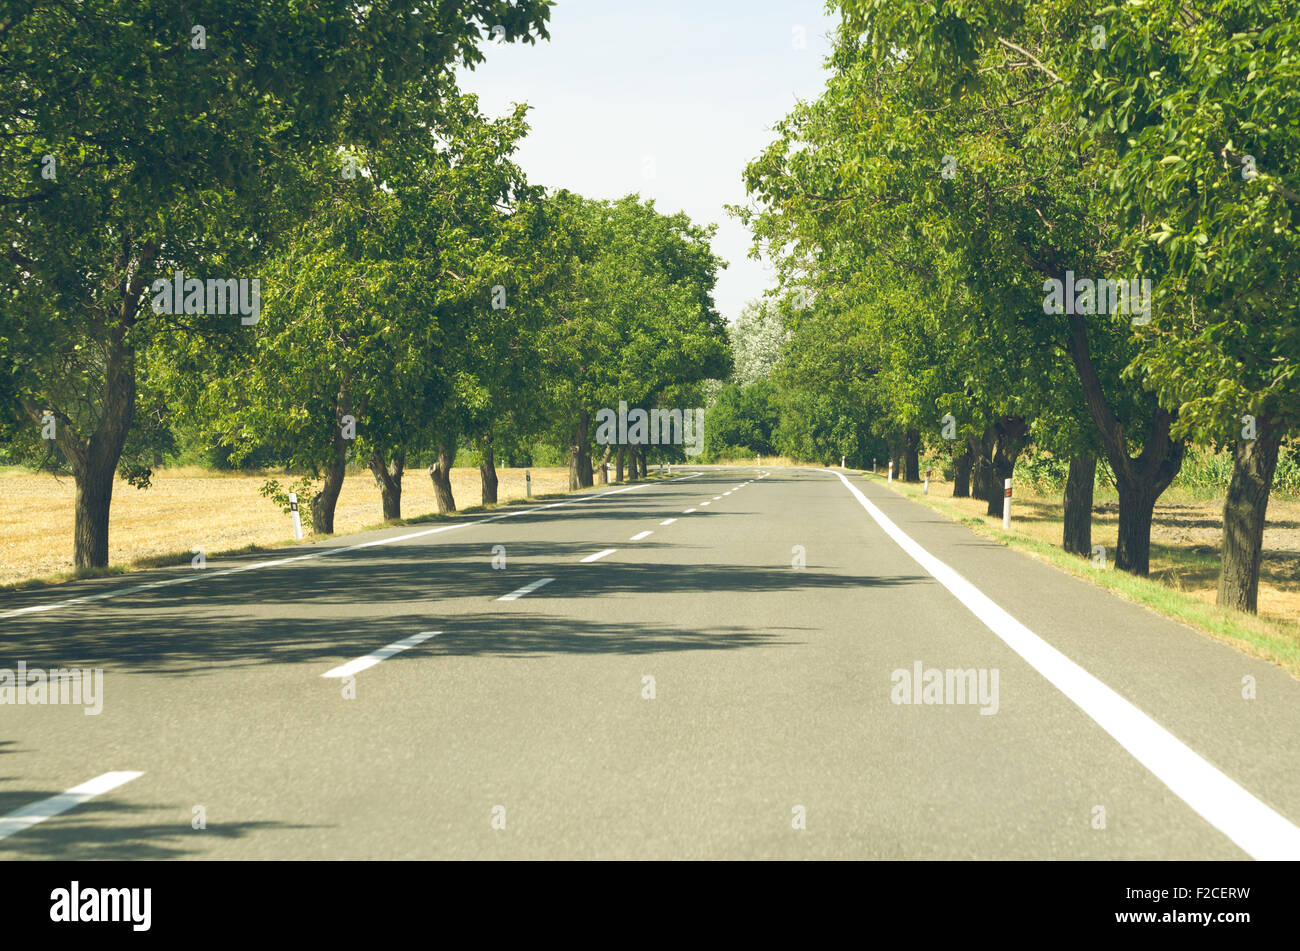 Walnut Tree Lined White Paint Asphalt Road at Summer Midday Stock Photo